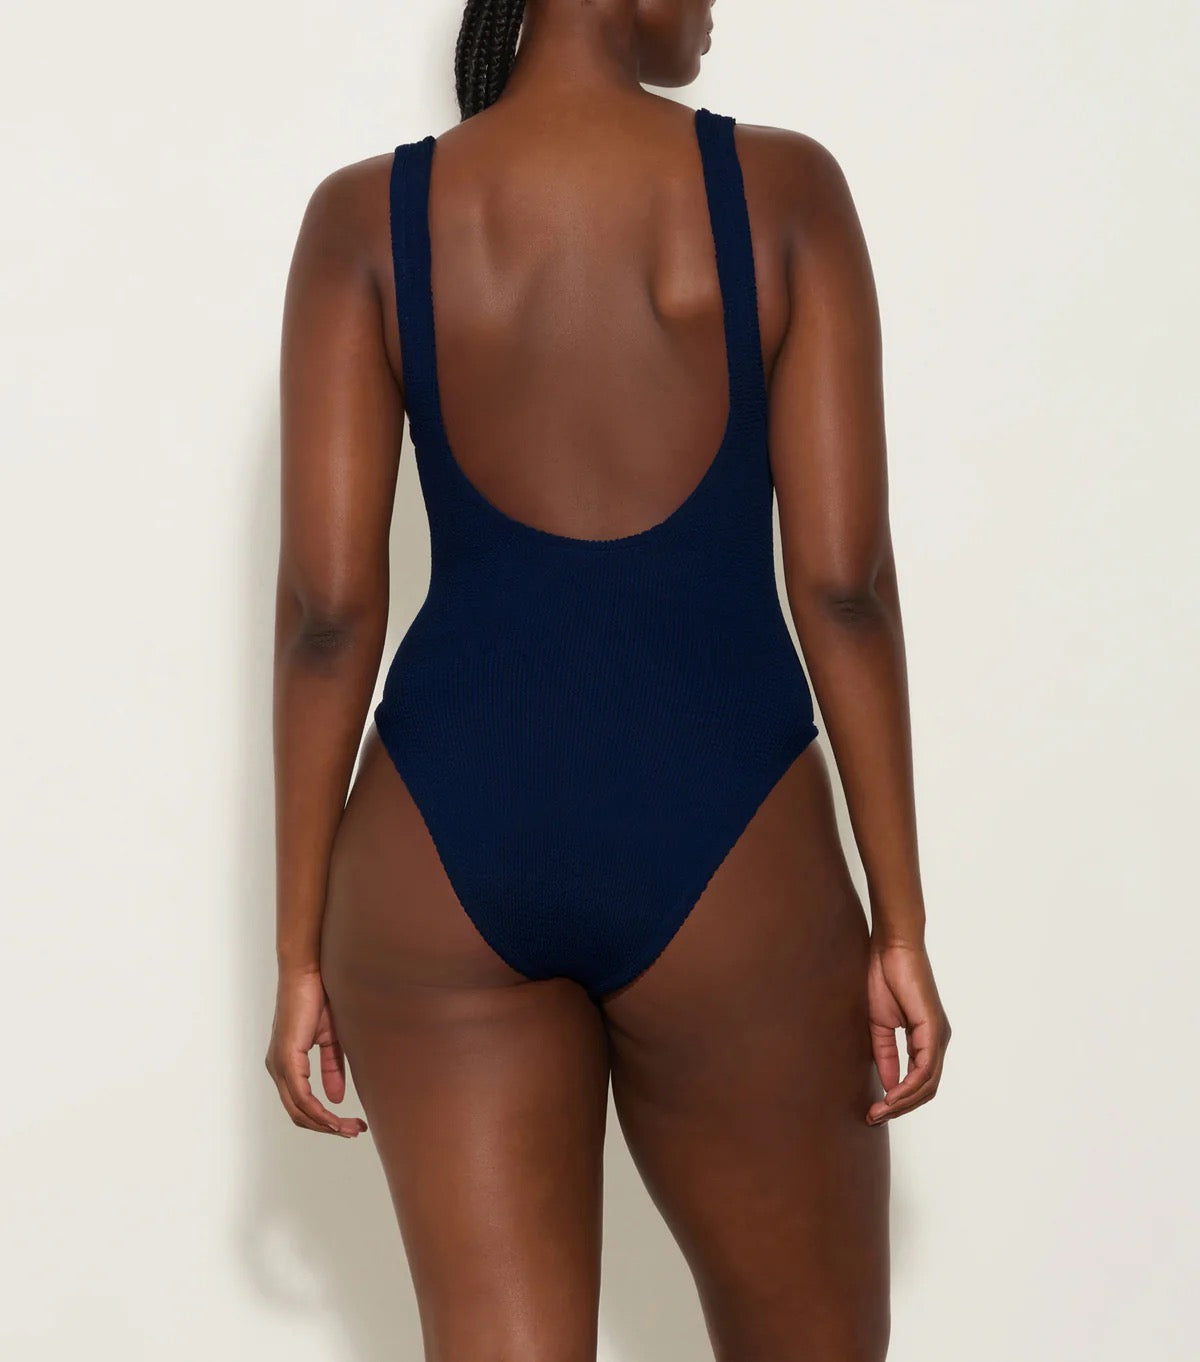 Hunza G Domino One Piece with Fabric Covered Hoops in Navy